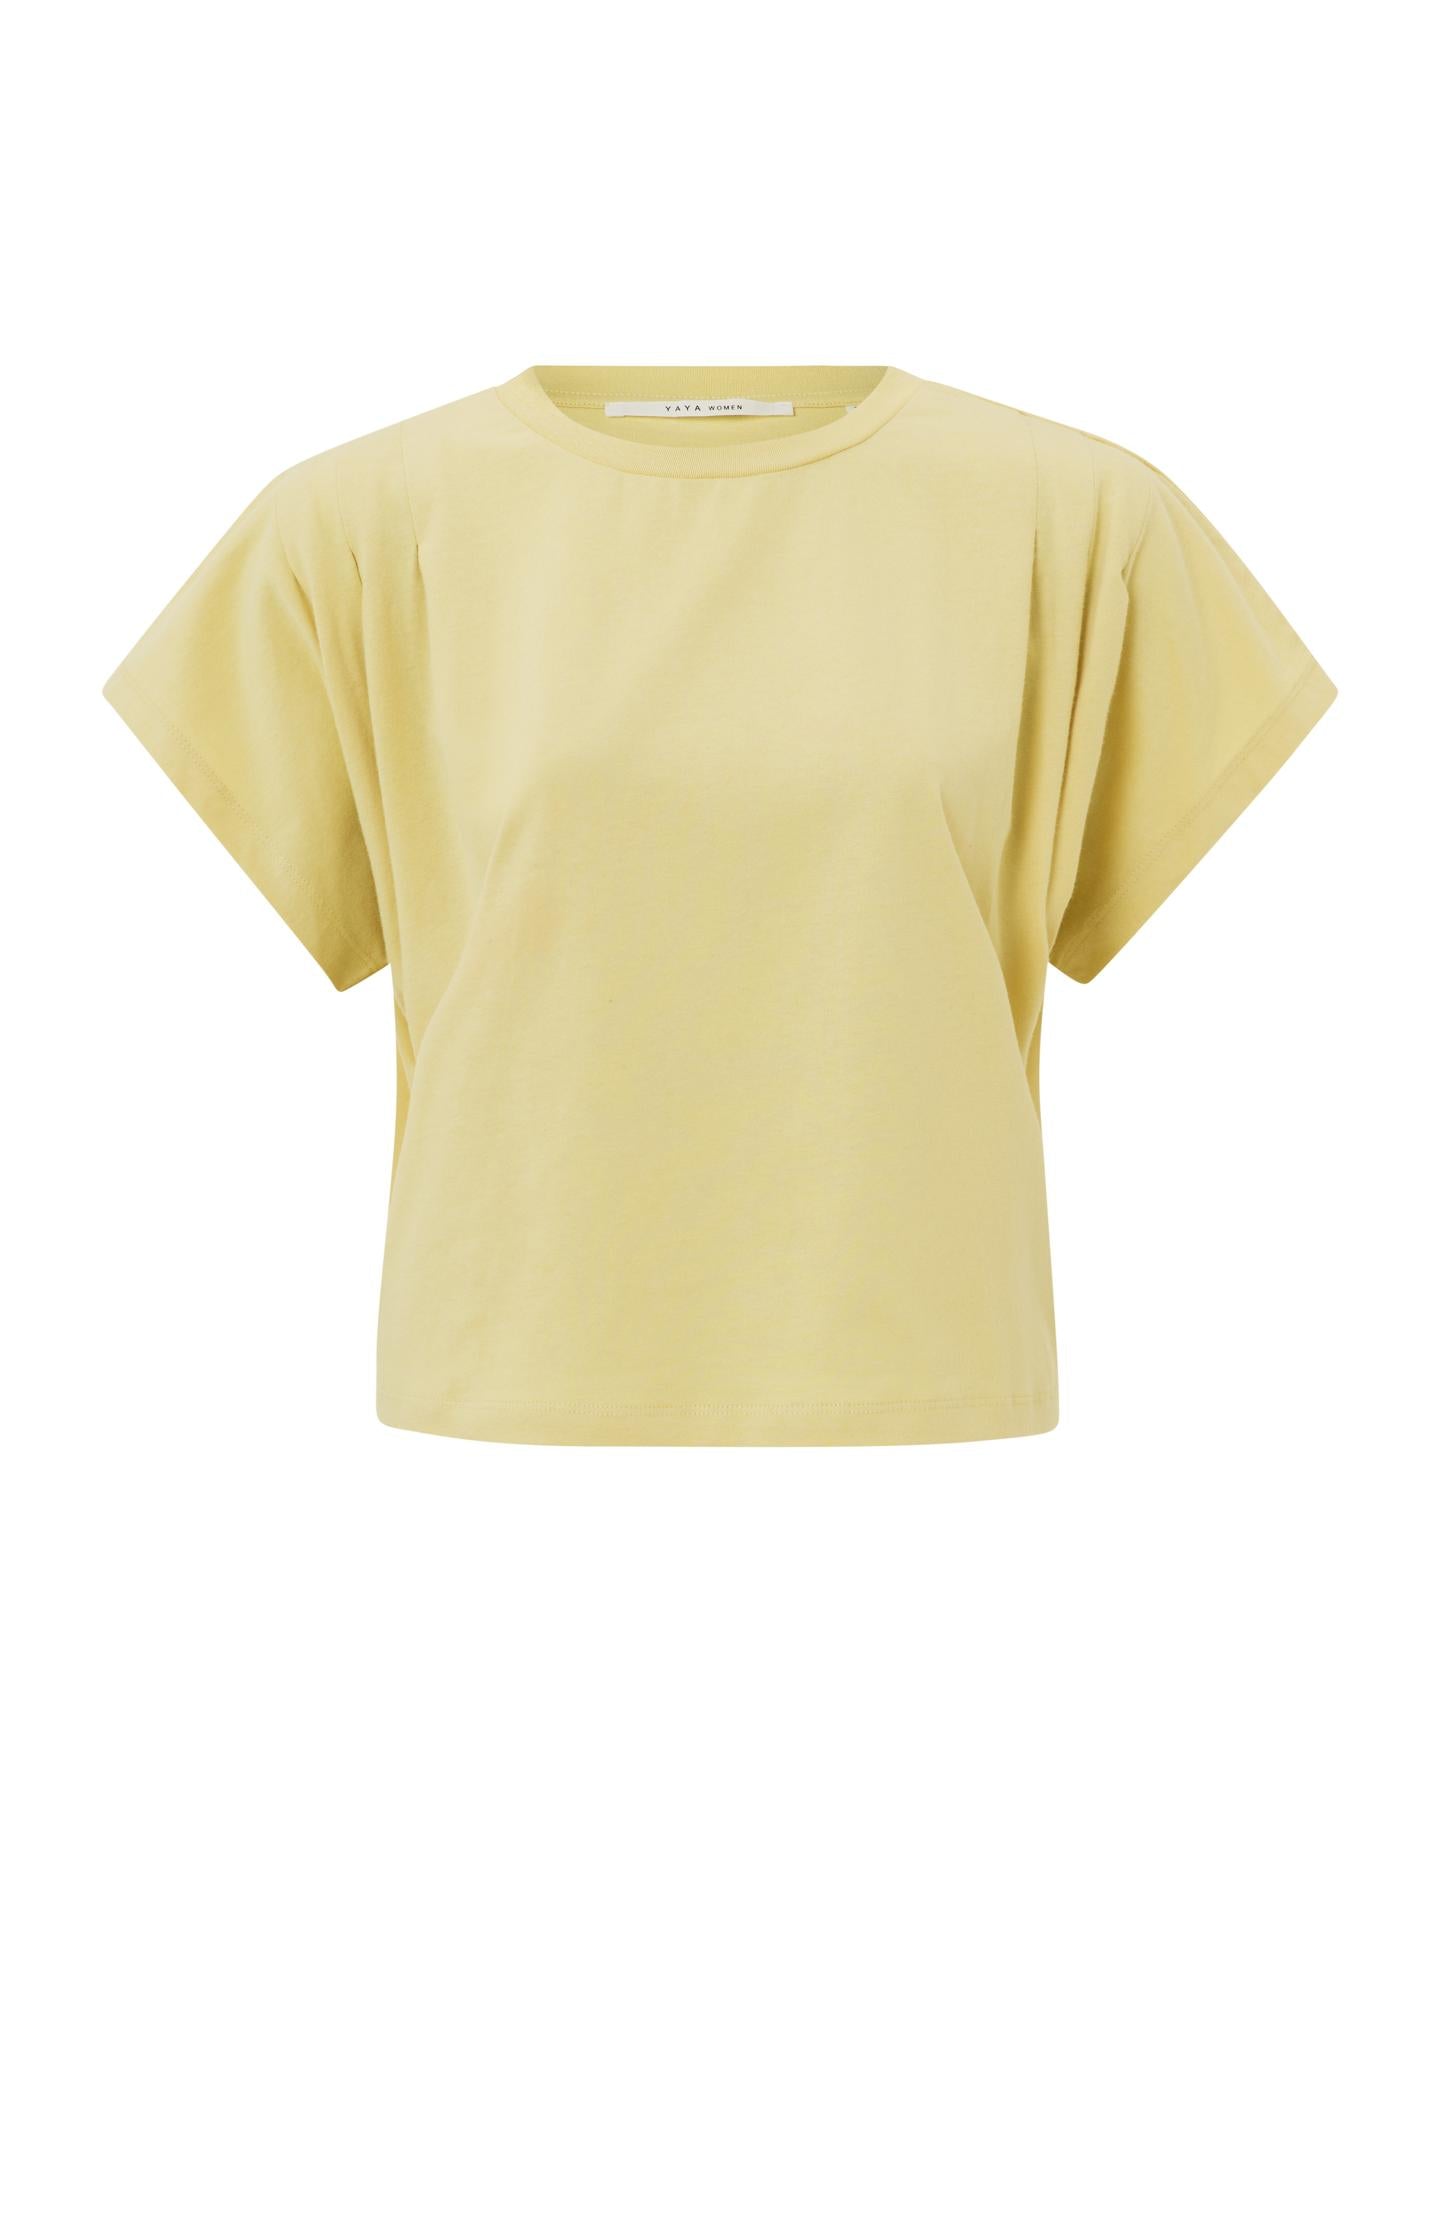 T-shirt with round neck, short sleeves and pleated details - Type: product